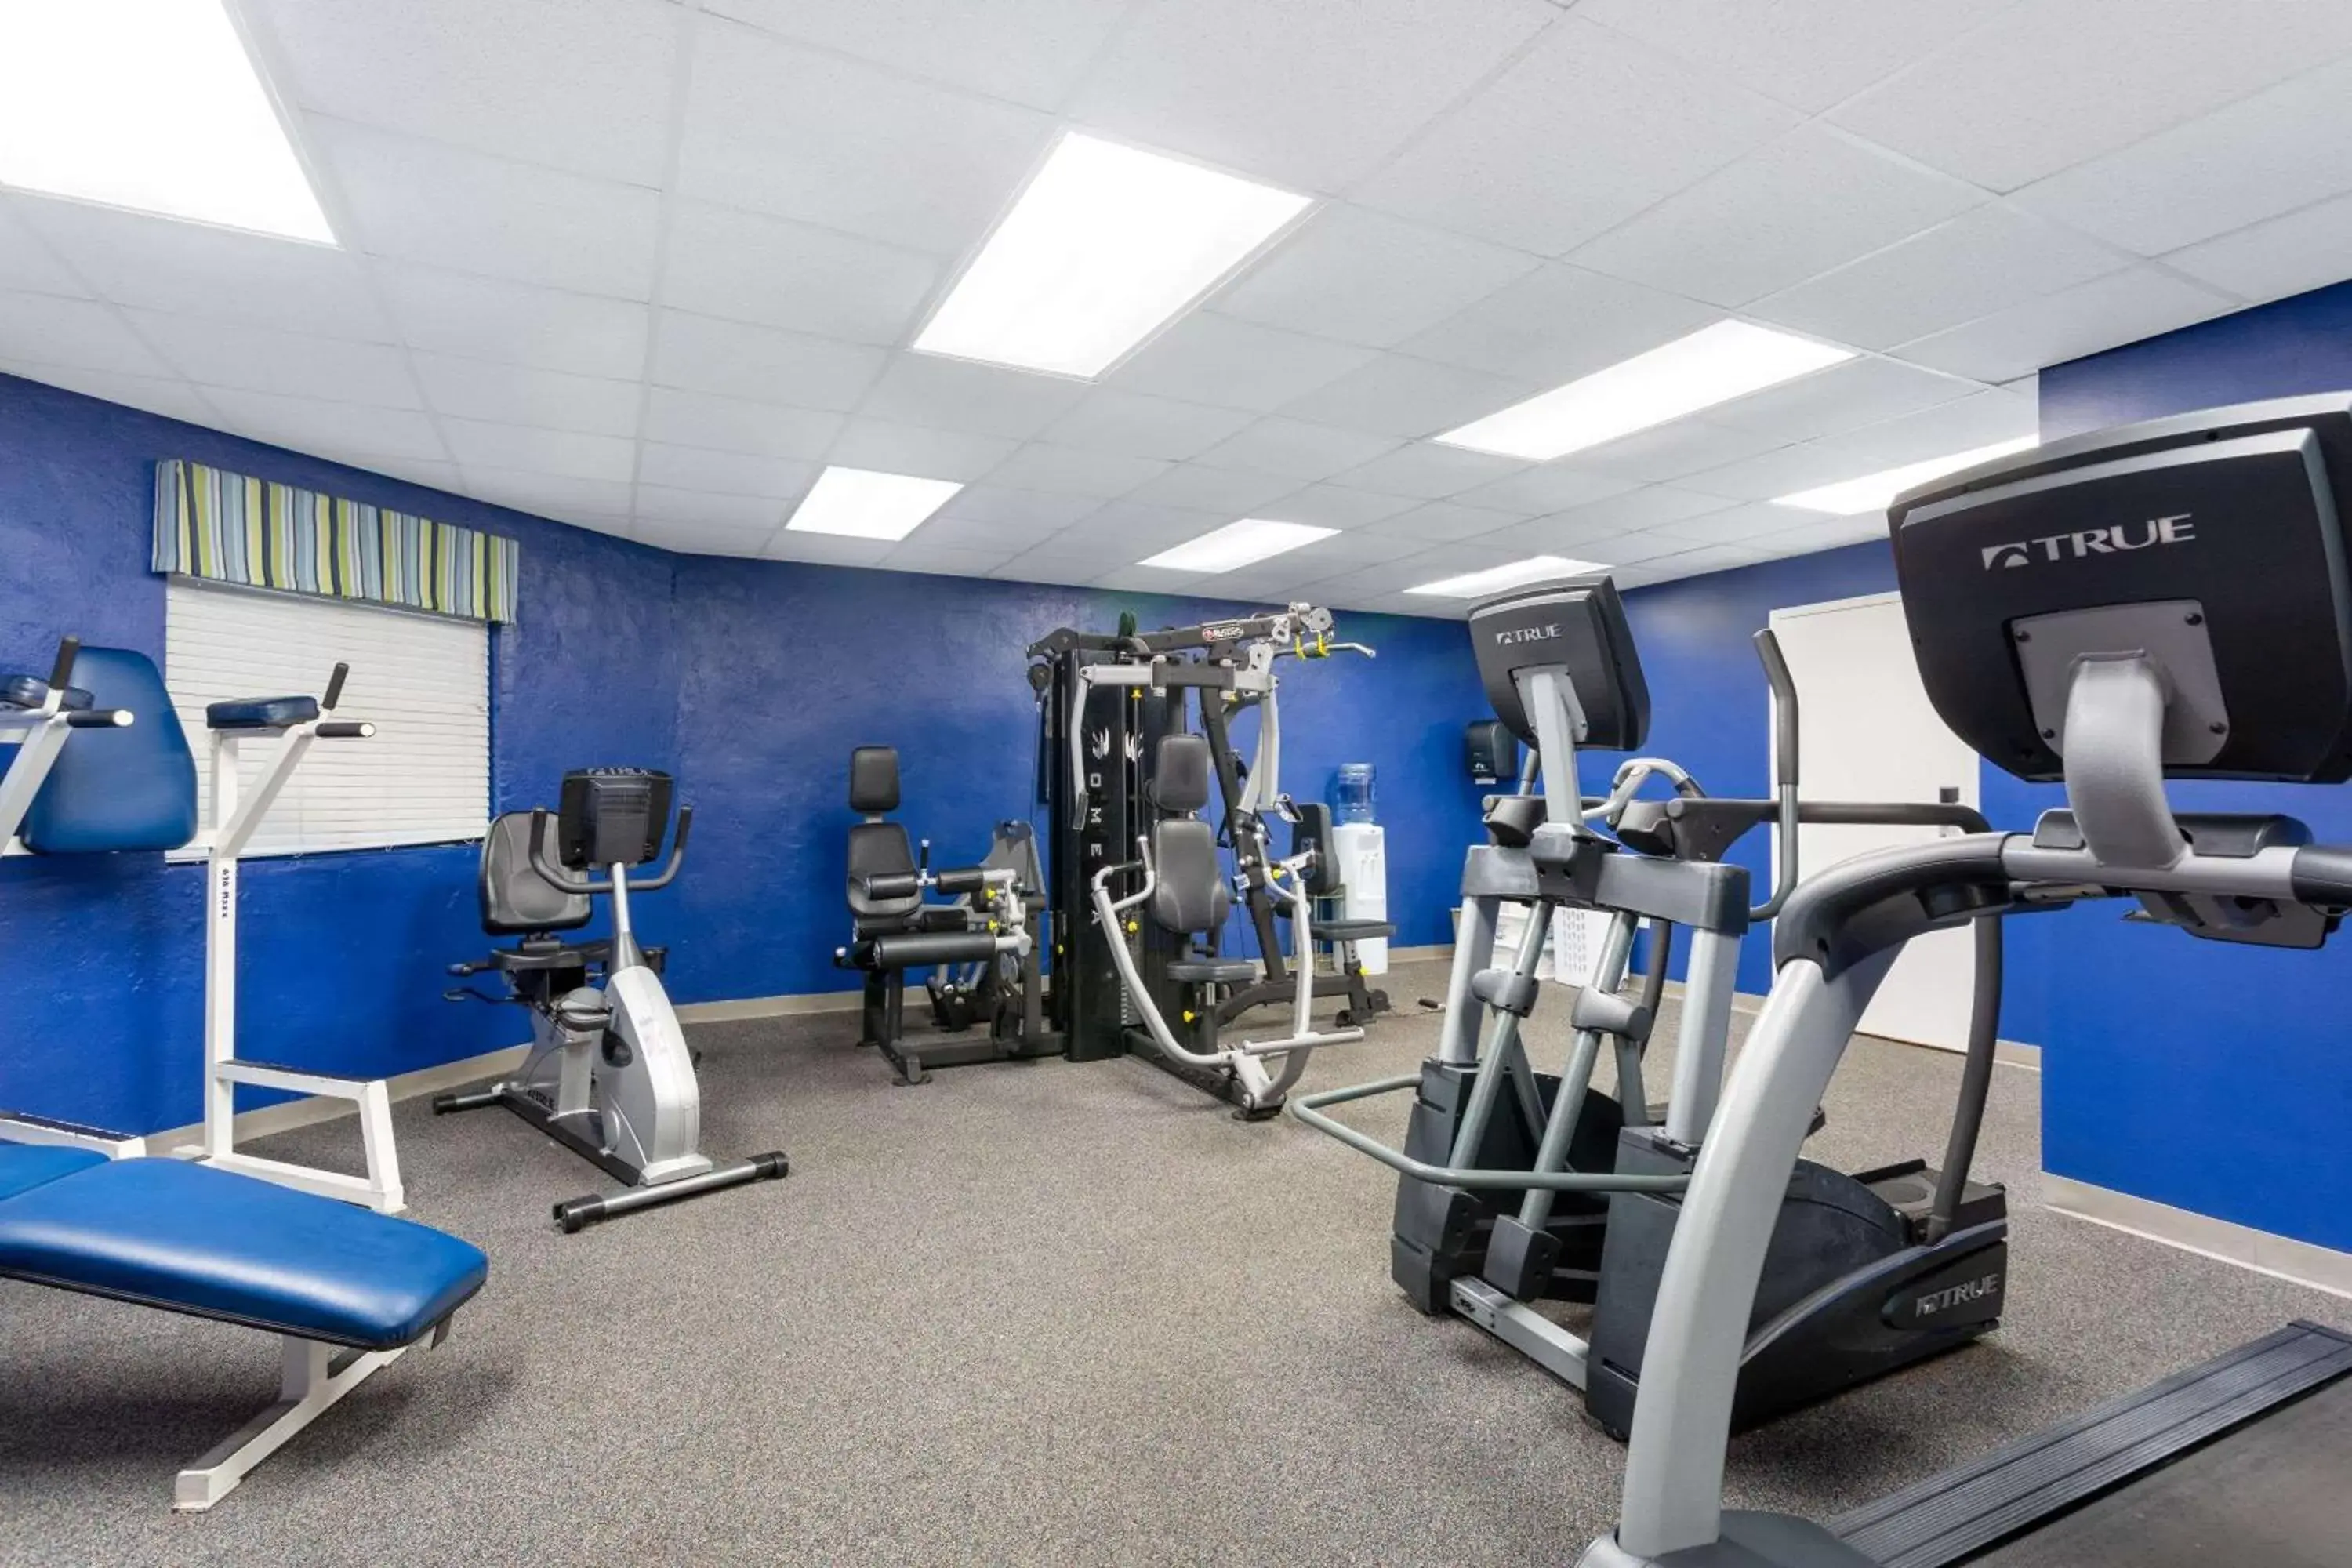 Fitness centre/facilities, Fitness Center/Facilities in Ocean Club Resort Myrtle Beach a Ramada by Wyndham